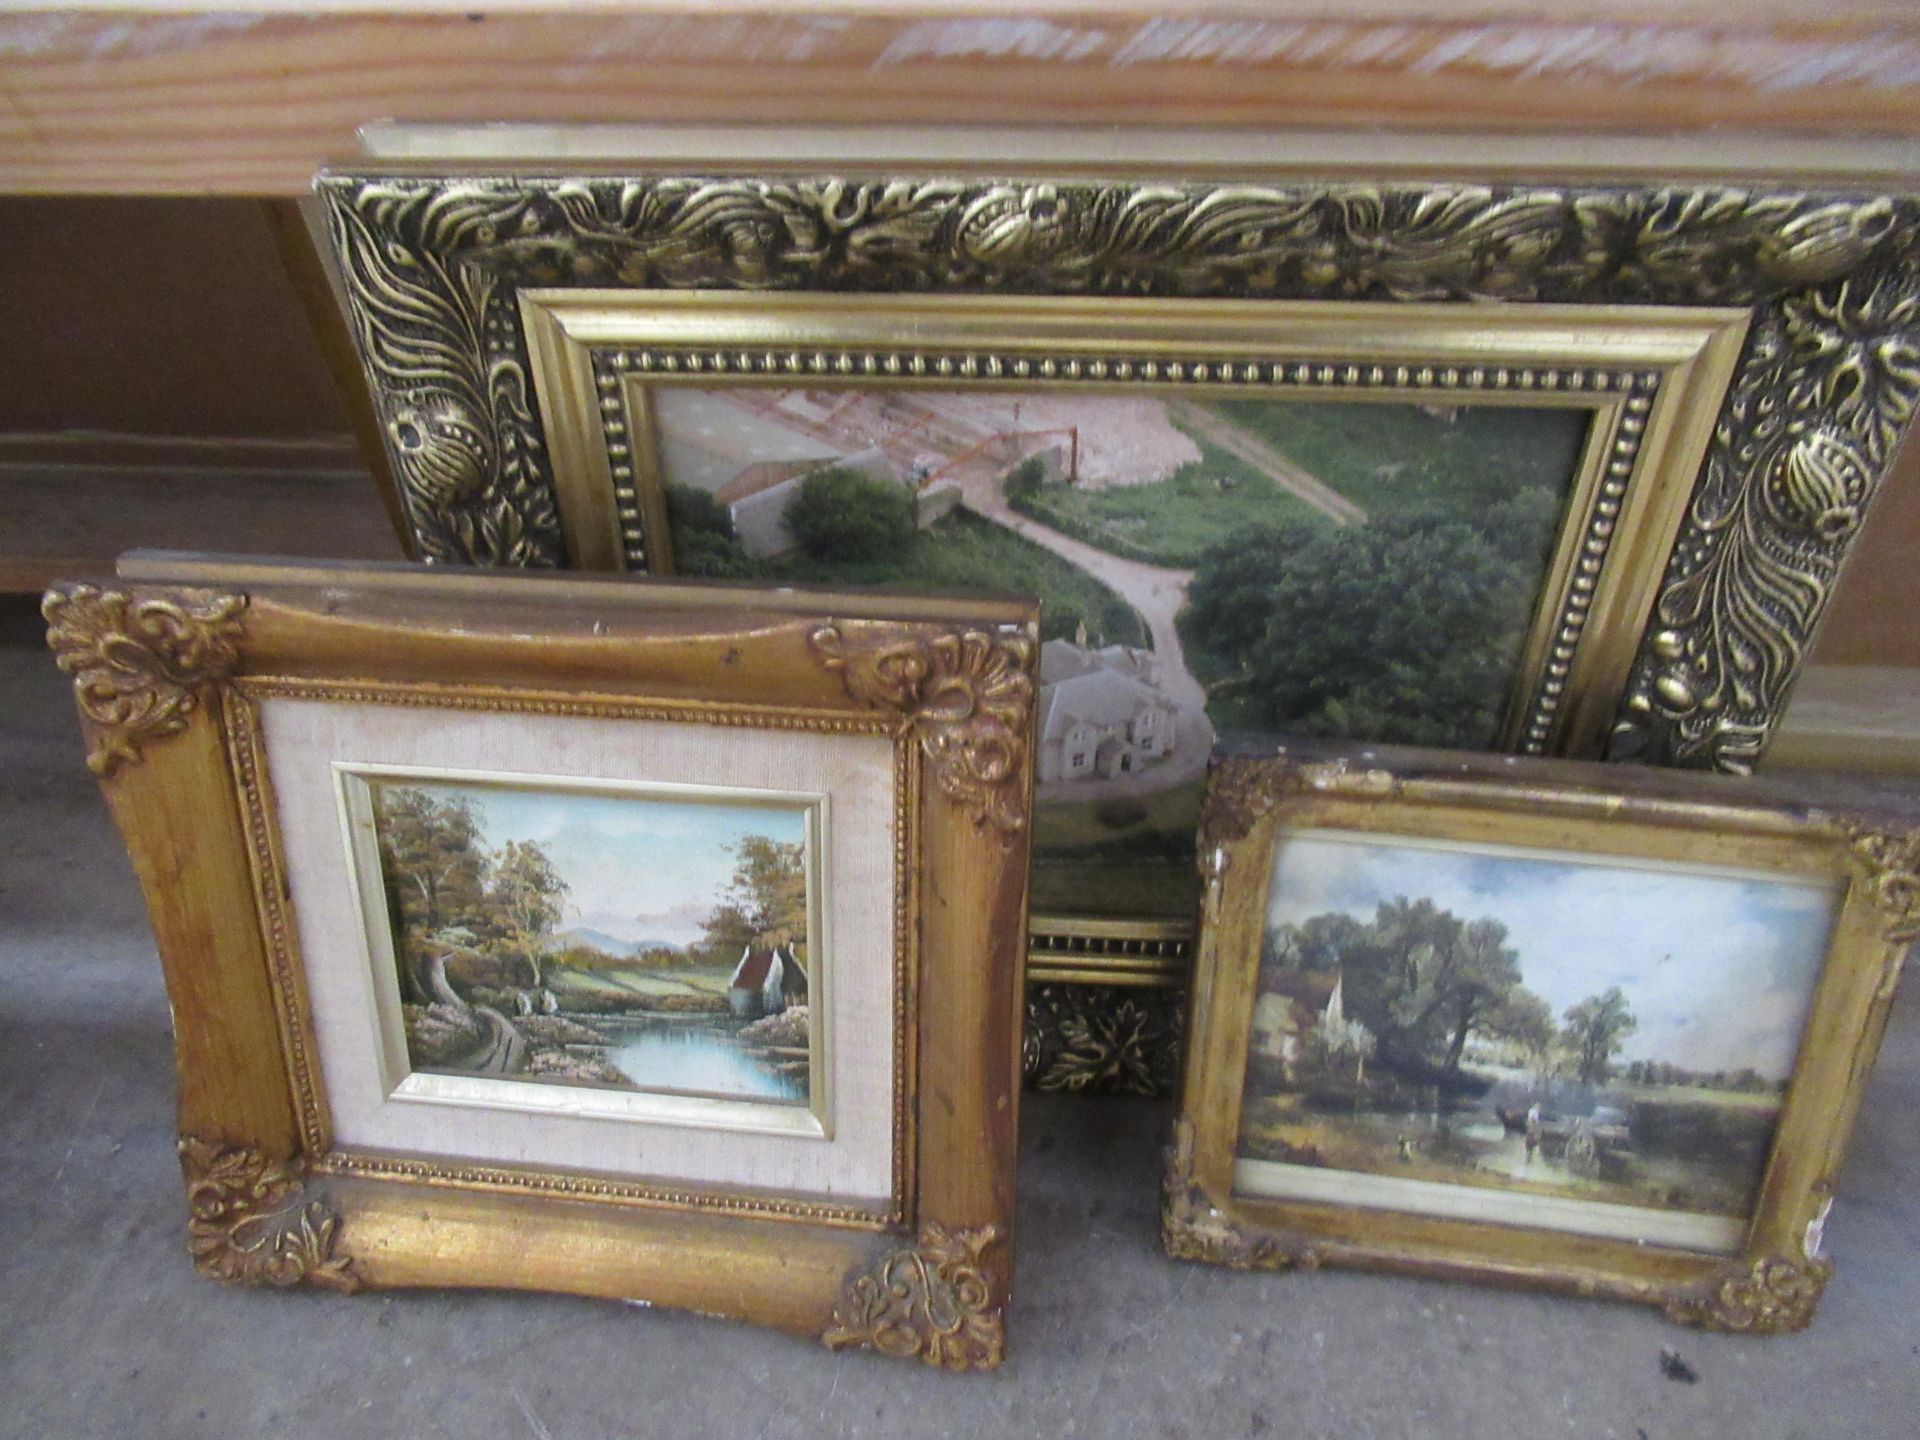 Lithograph, water colour and Photograph all in Gilt Frames (largest 18cm x 22cm)